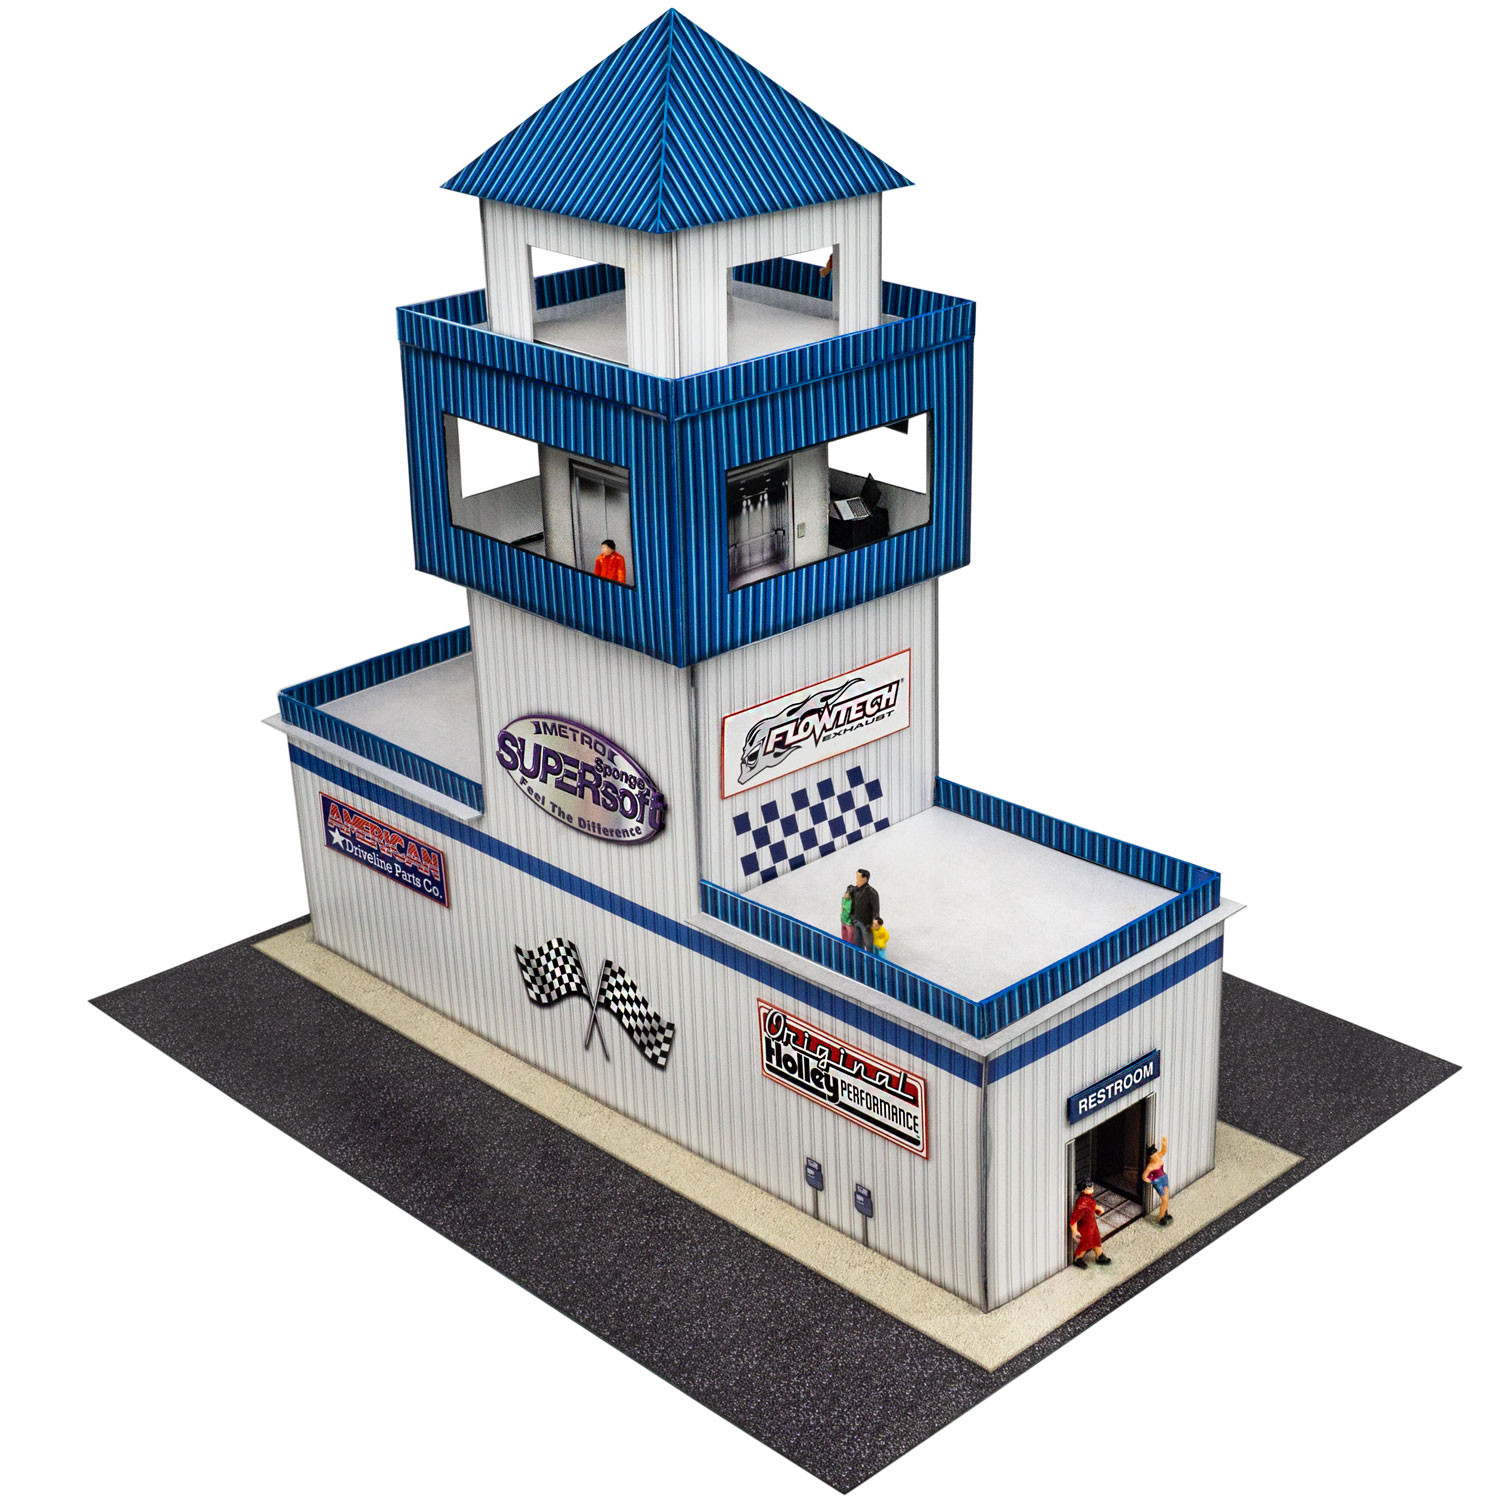 BK 6461 1:64 Scale "Track Tower" Photo Real Scale Building Kit